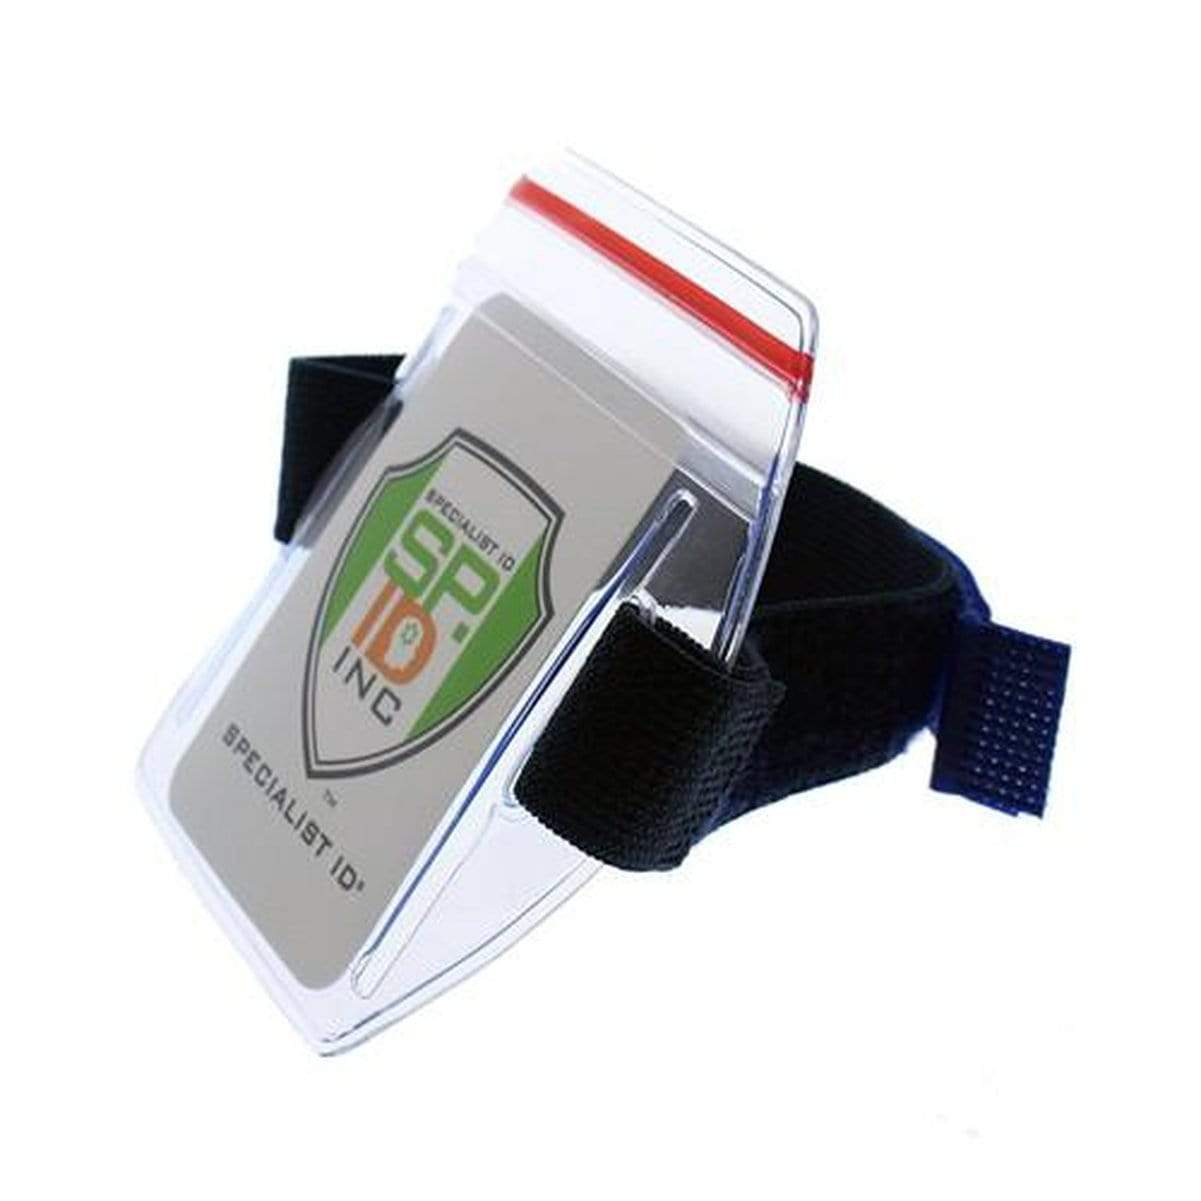 Navy Blue Vertical Armband ID Badge Holders with Zipper Top (504-ARZB & 504-ARZW) 504-ARZB